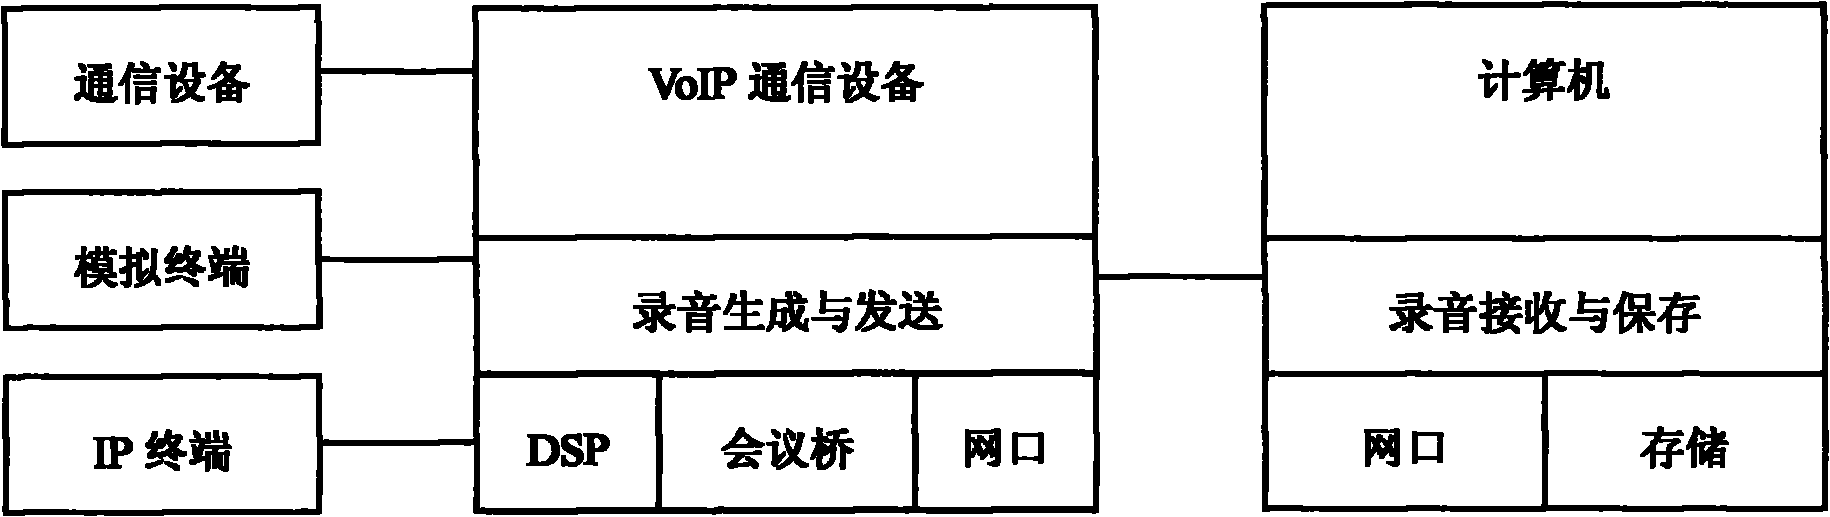 Recording acquisition method for voice over internet protocol (VoIP) communication system